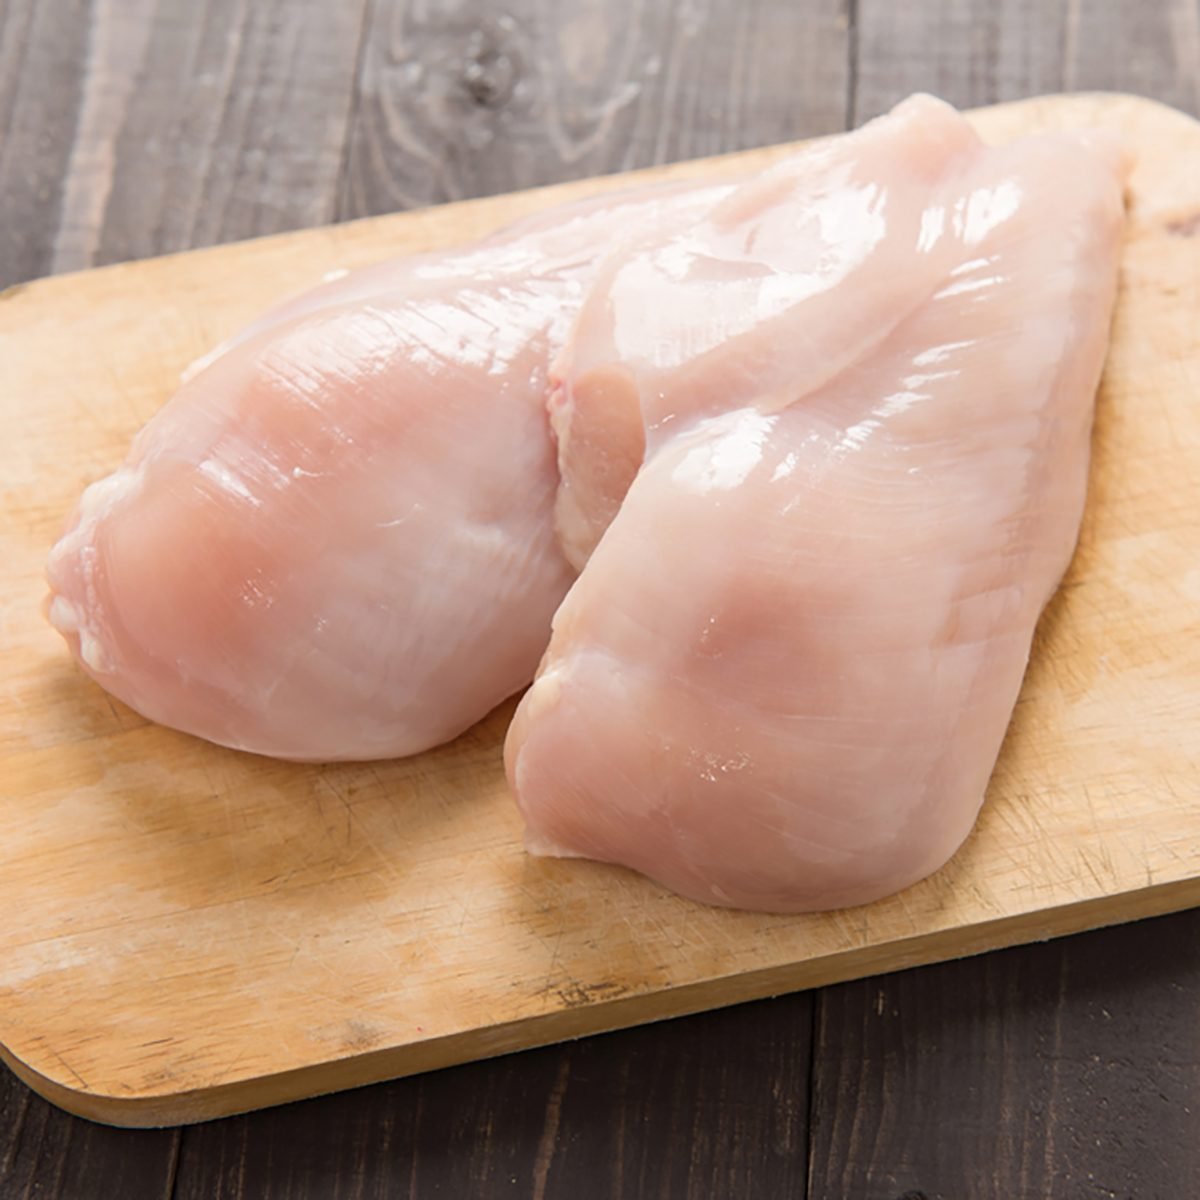 The 7 Biggest Mistakes When Cooking Chicken Breasts